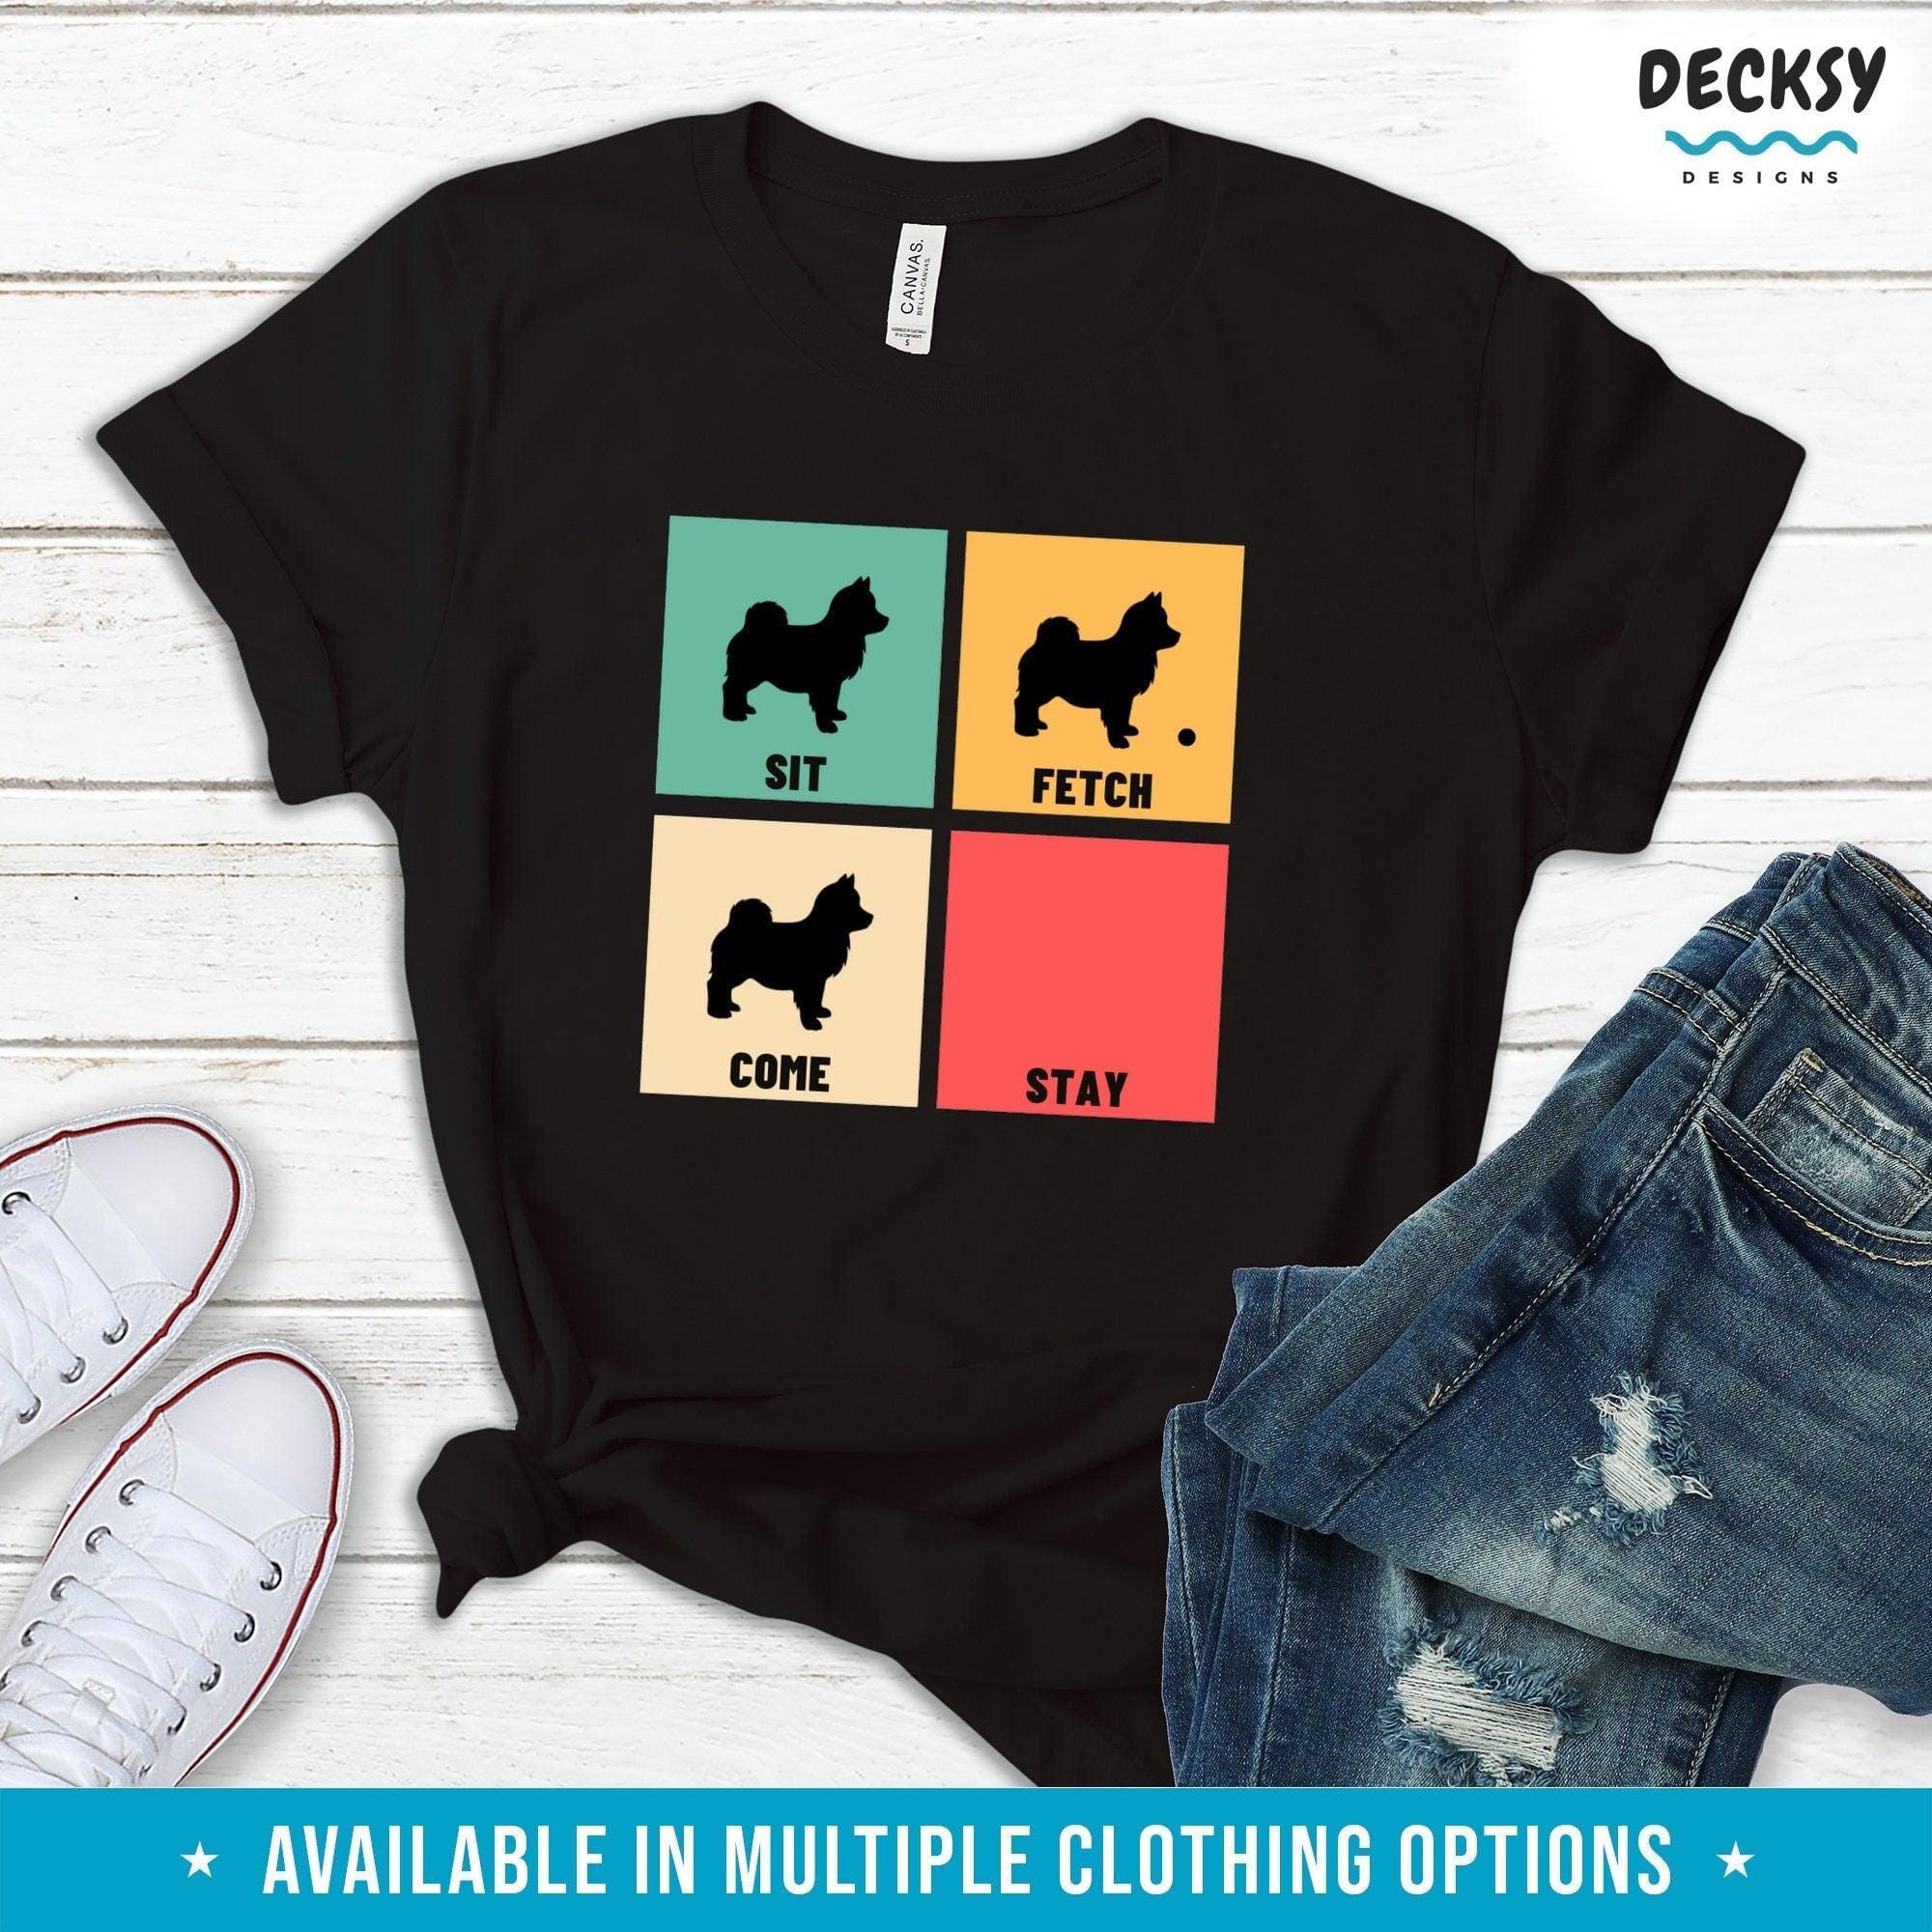 Pomsky Dog Shirt, Pomeranian Husky Gift-Clothing:Gender-Neutral Adult Clothing:Tops & Tees:T-shirts:Graphic Tees-DecksyDesigns